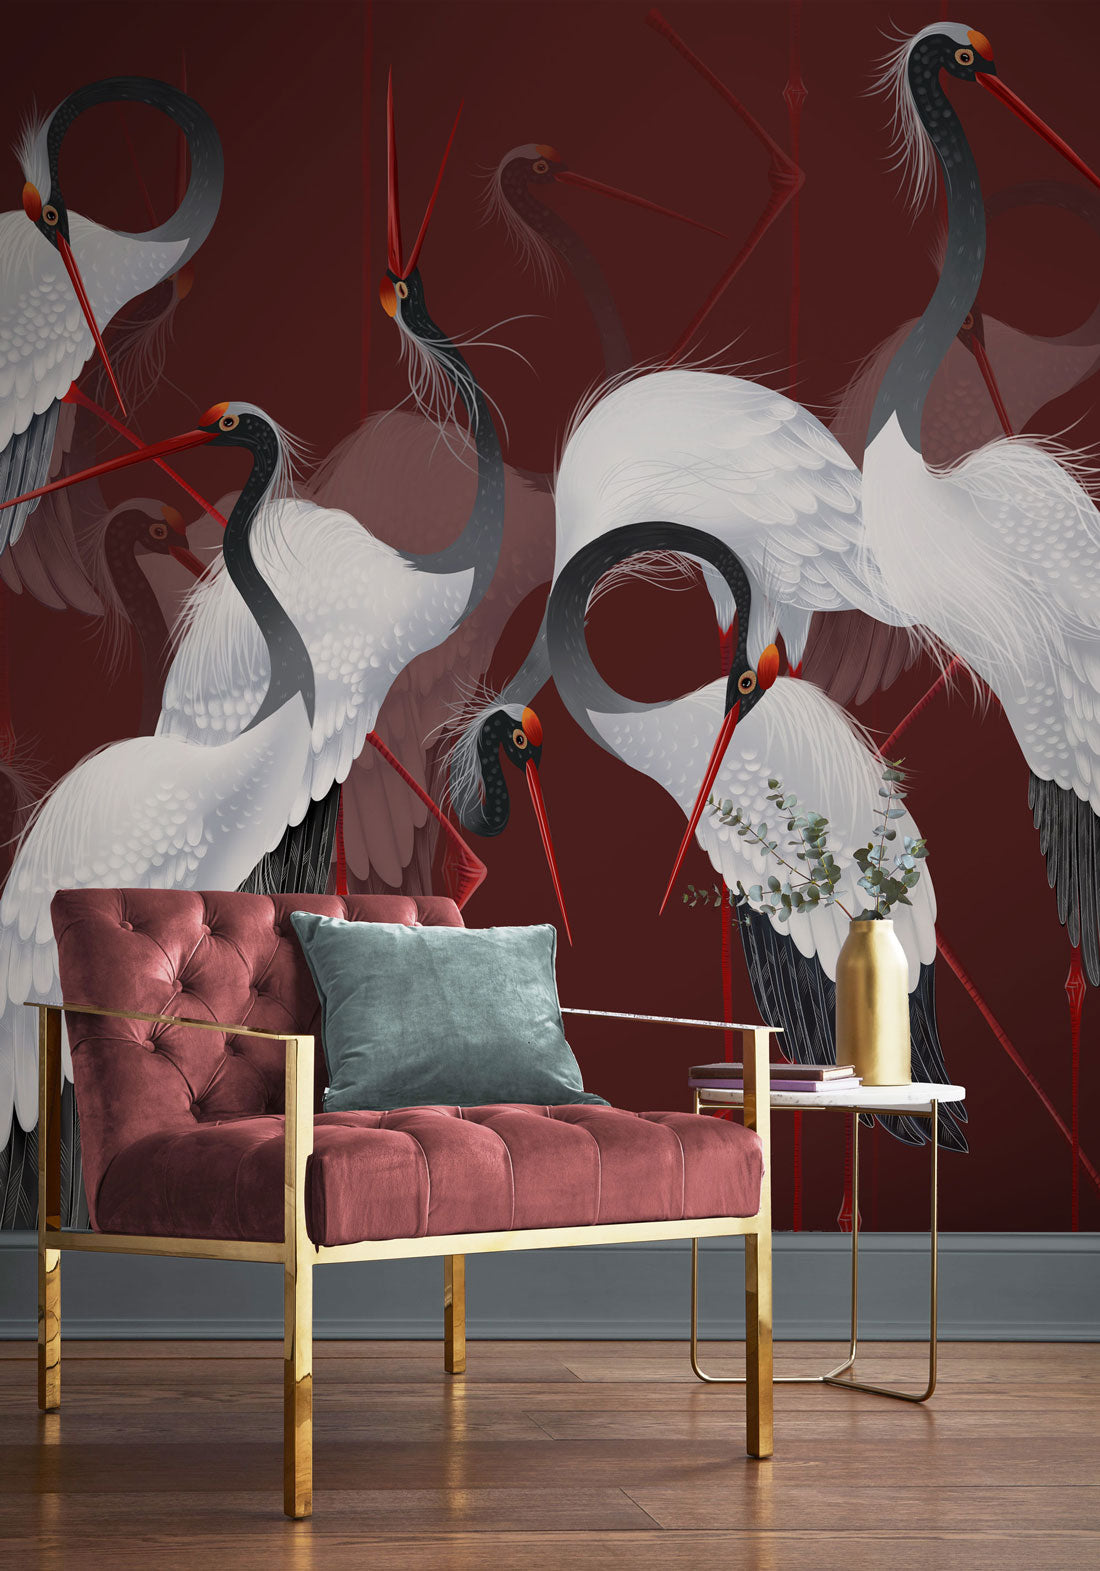 wallpaper mural depicting a flock of cranes for the living room